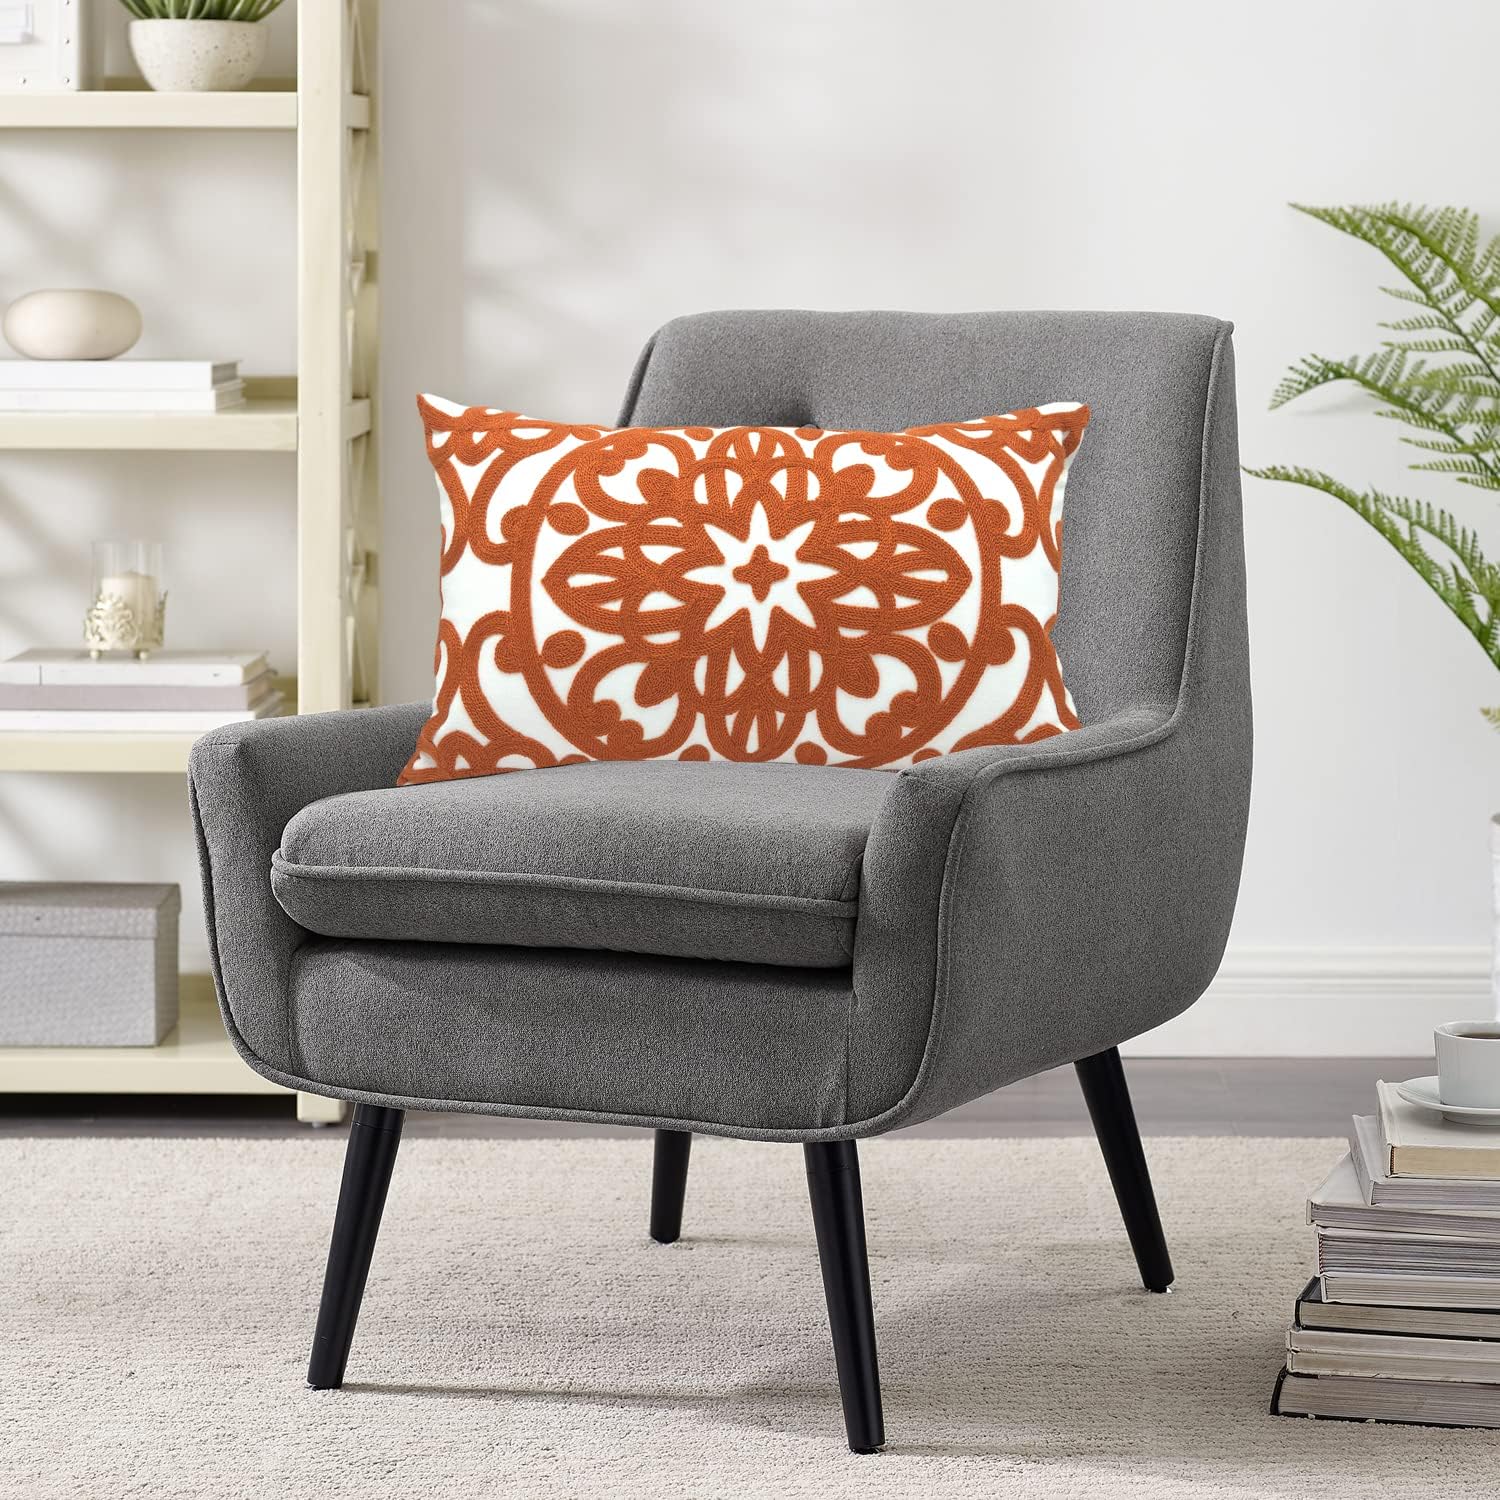 Enhance Your Home Decor with the Alysheer Embroidered Lumbar Decorative Throw Pillow Cover